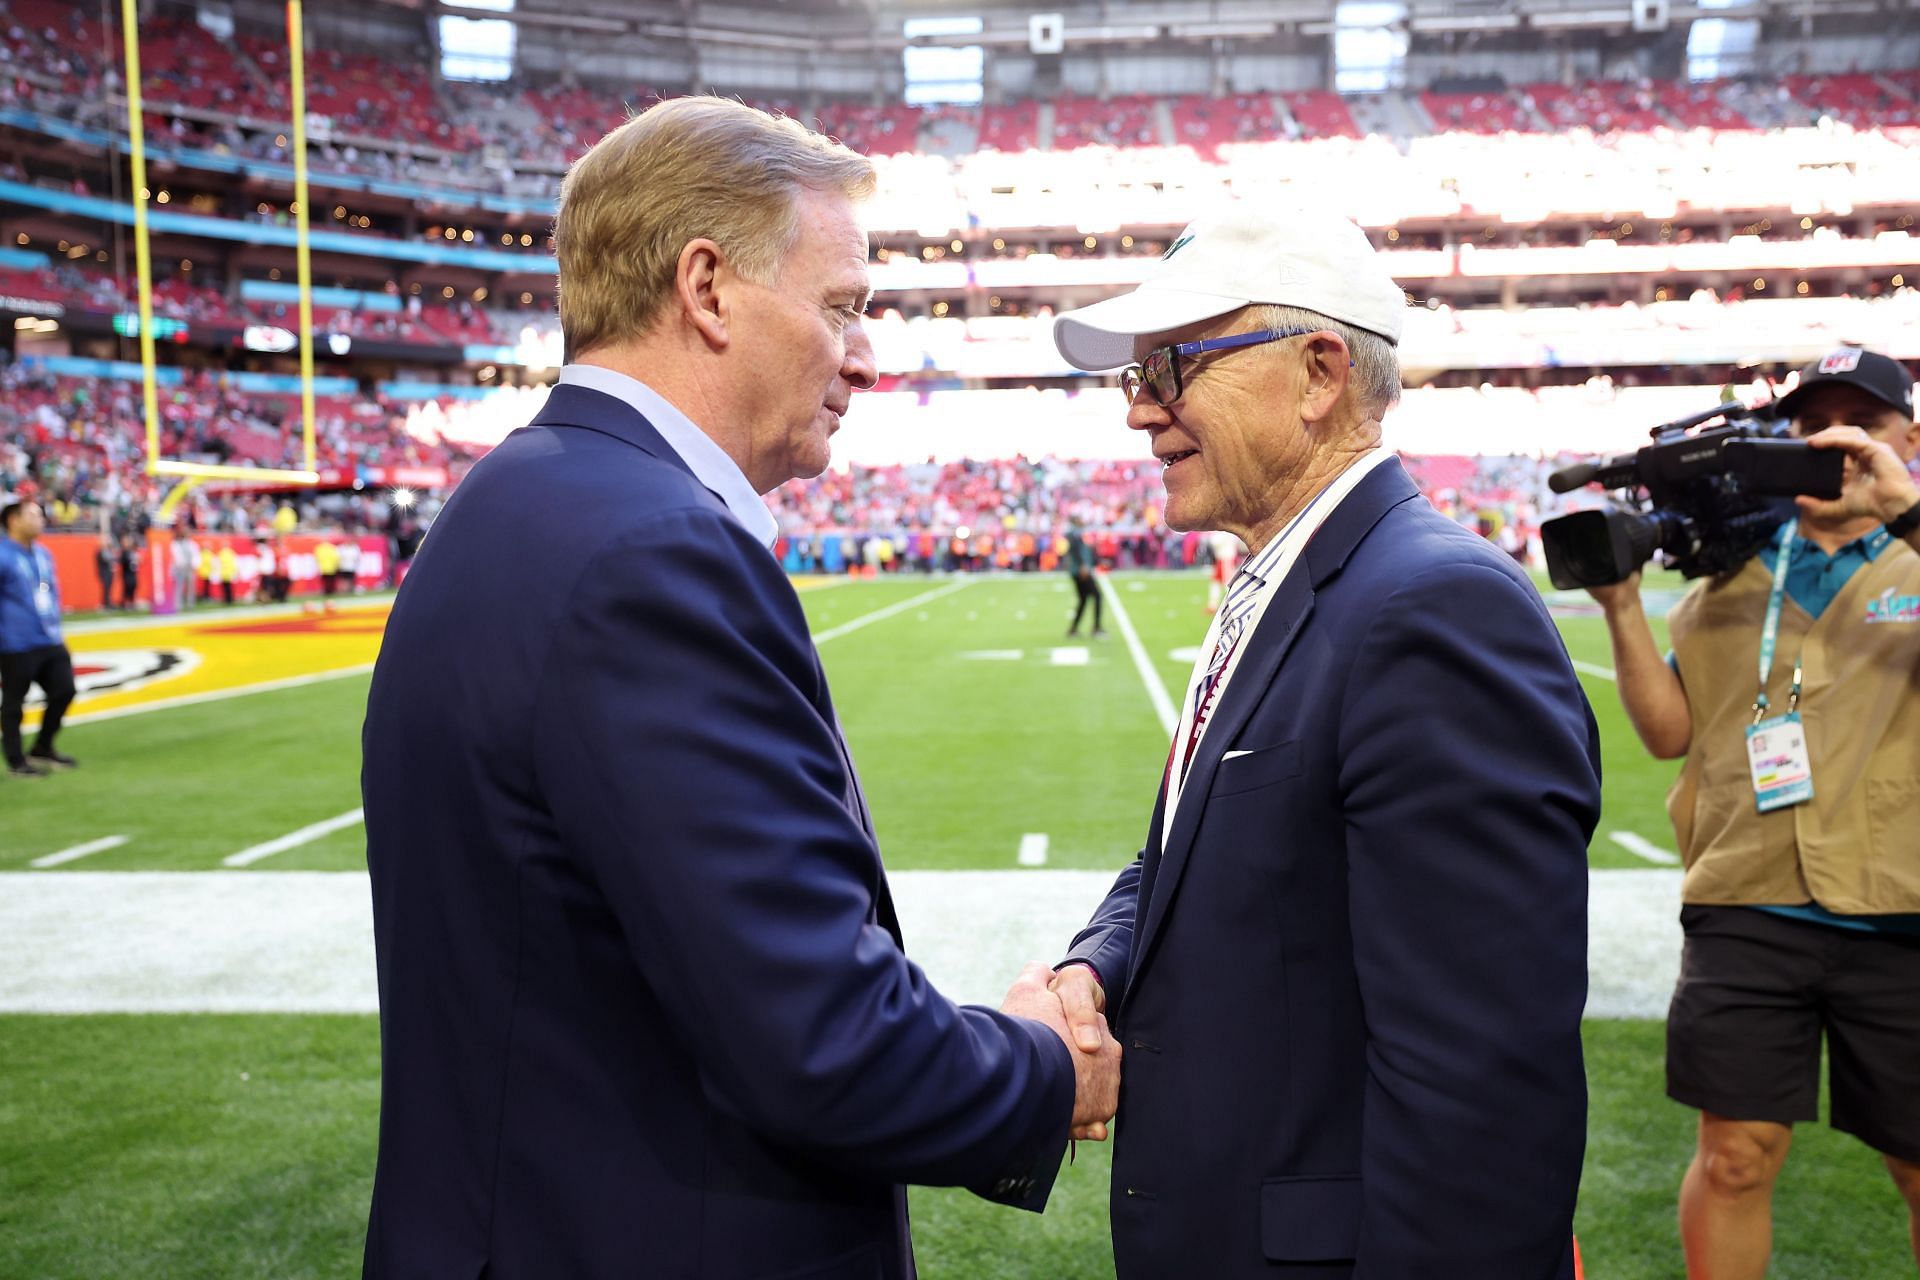 Jets owner Woody Johnson and Roger Goodell at Super Bowl LVII